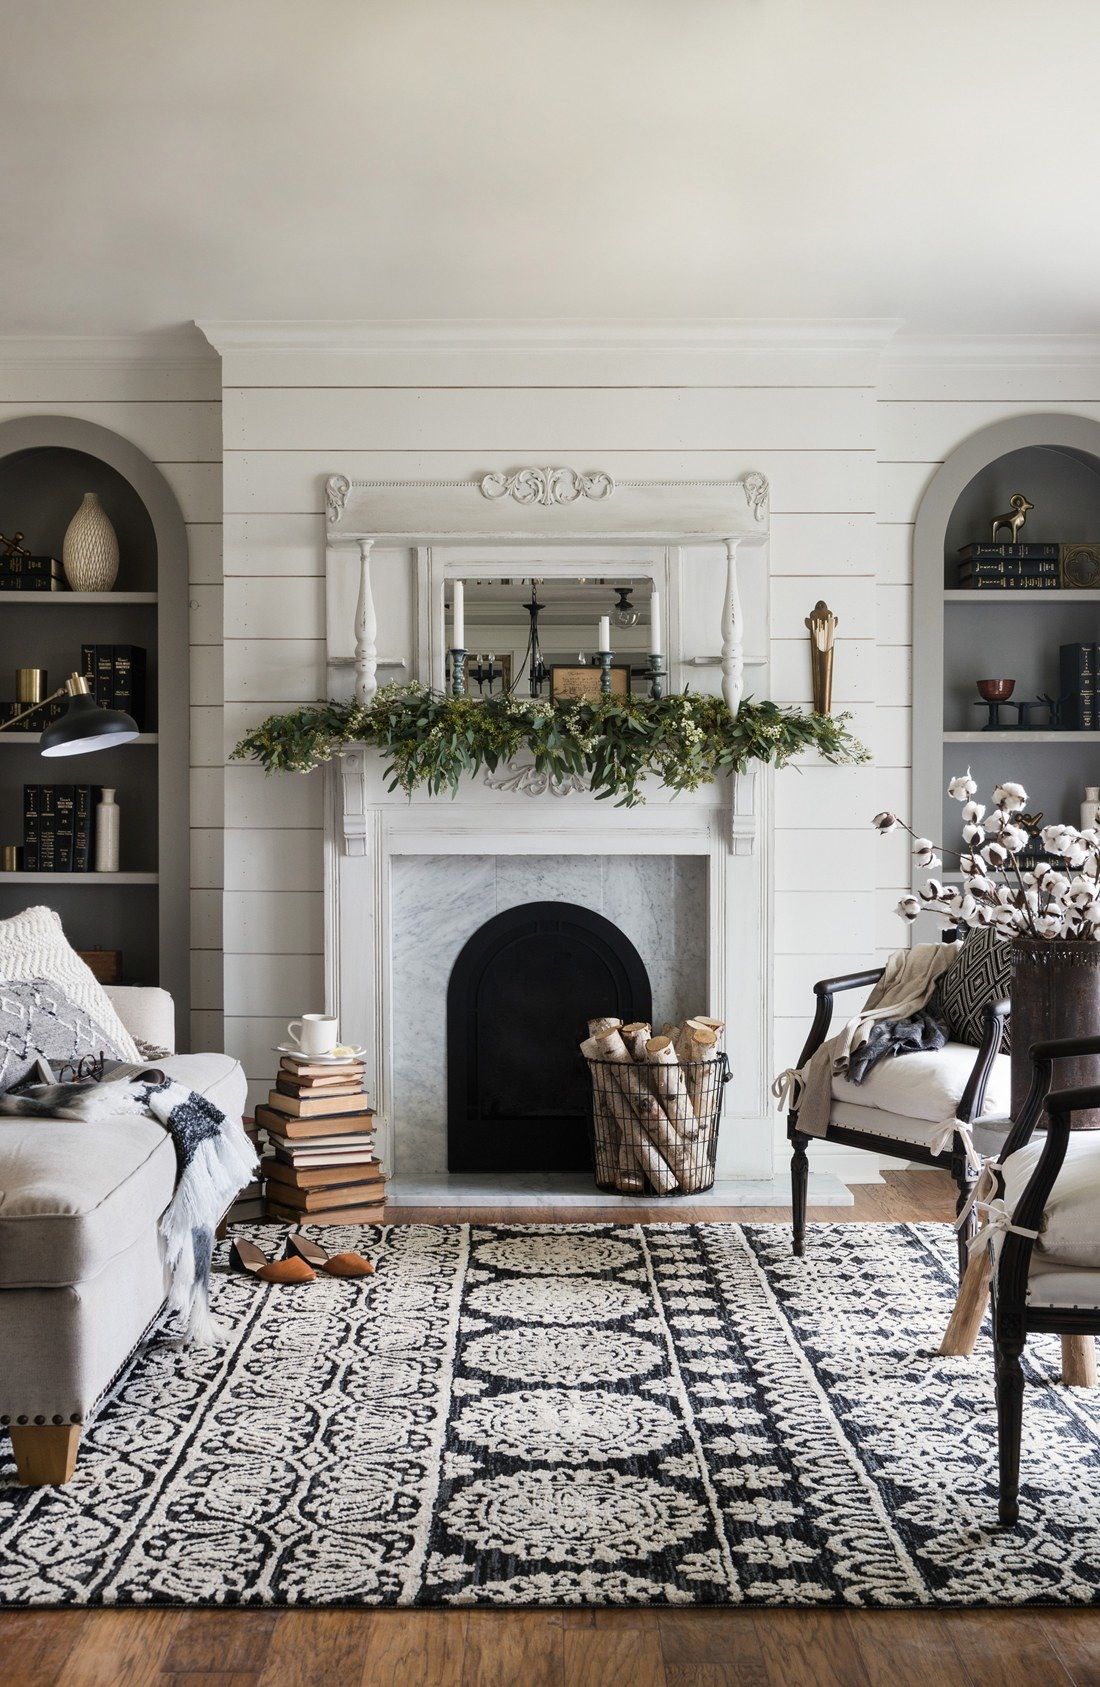 Living room rugs are great ideas for updating with carpets.  HVNIWFW